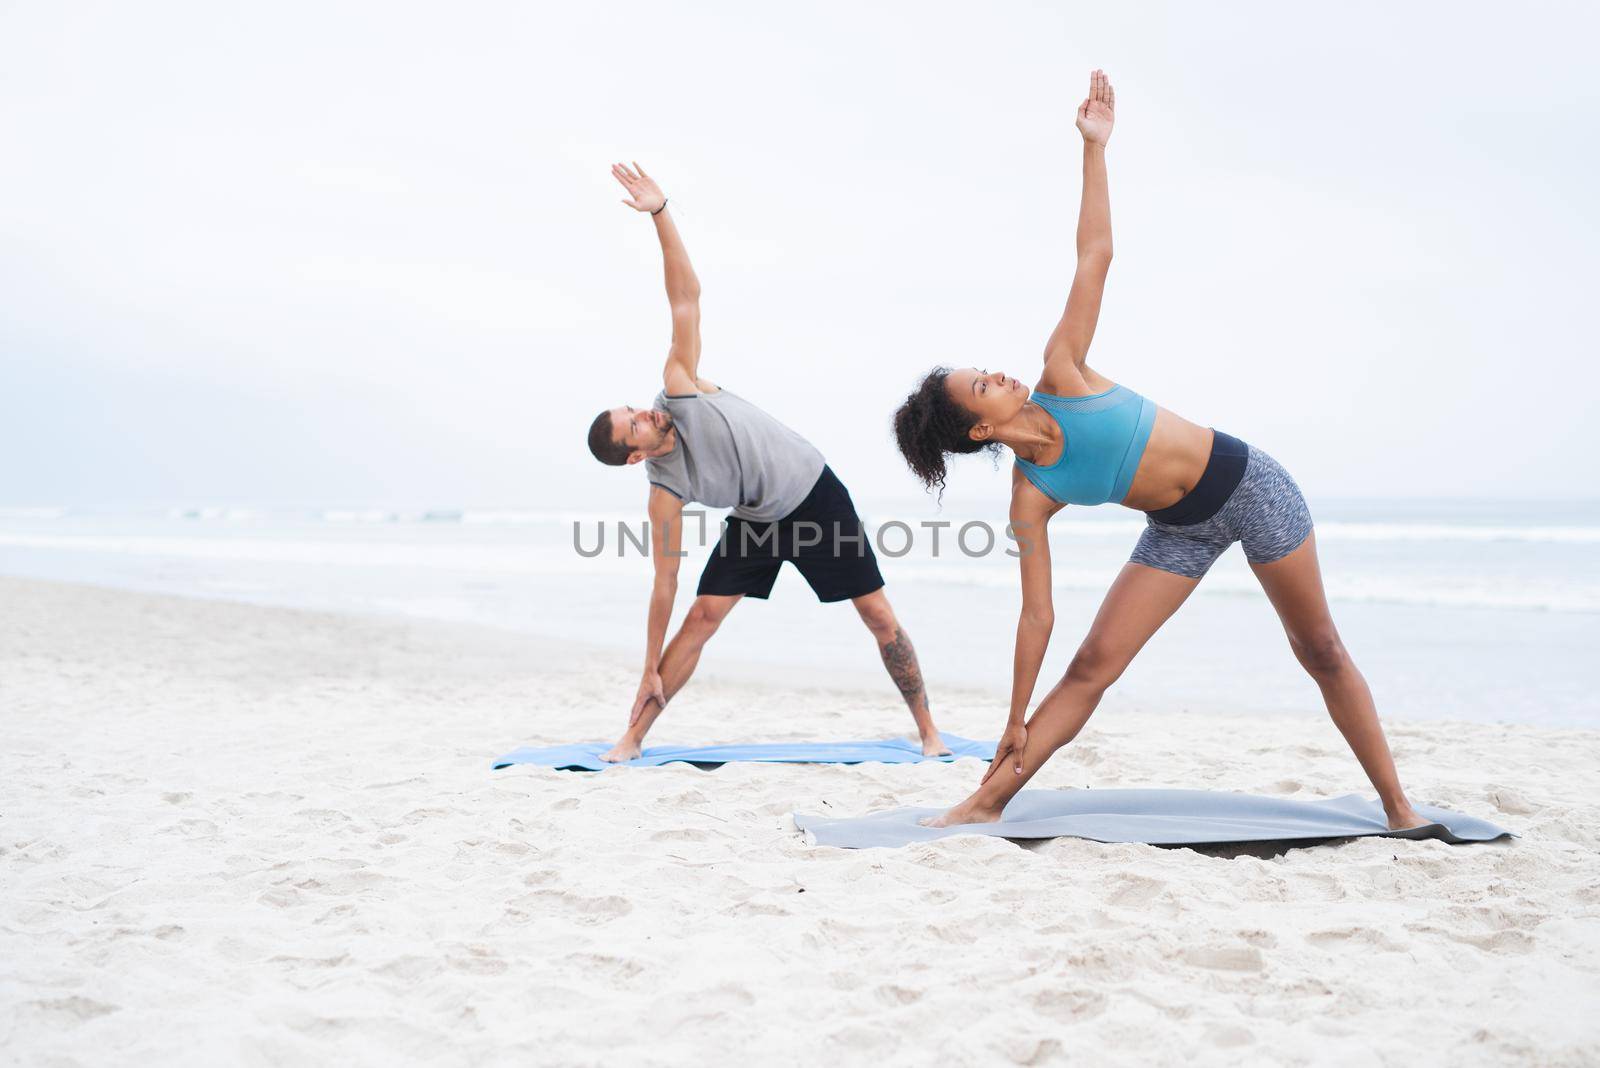 Yoga lies at the core of their wellbeing. a young man and woman practising yoga together at the beach